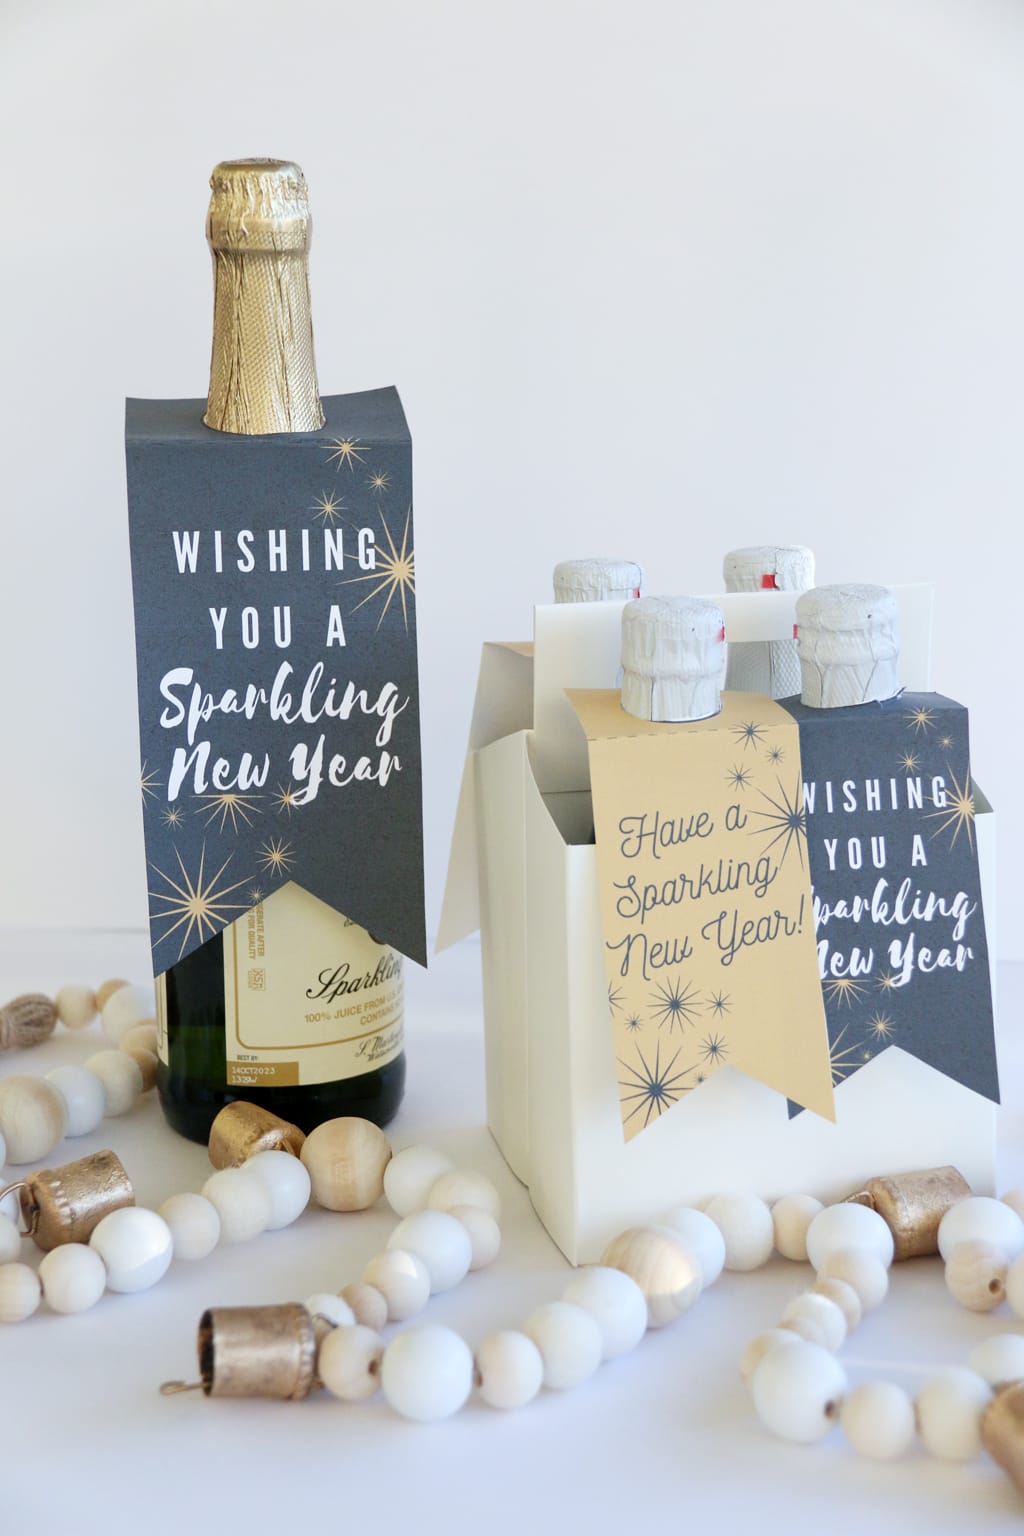 One large and drink caddy full of small bottles of Sparkling cider with New Year Sparkling Cider Gift Tags